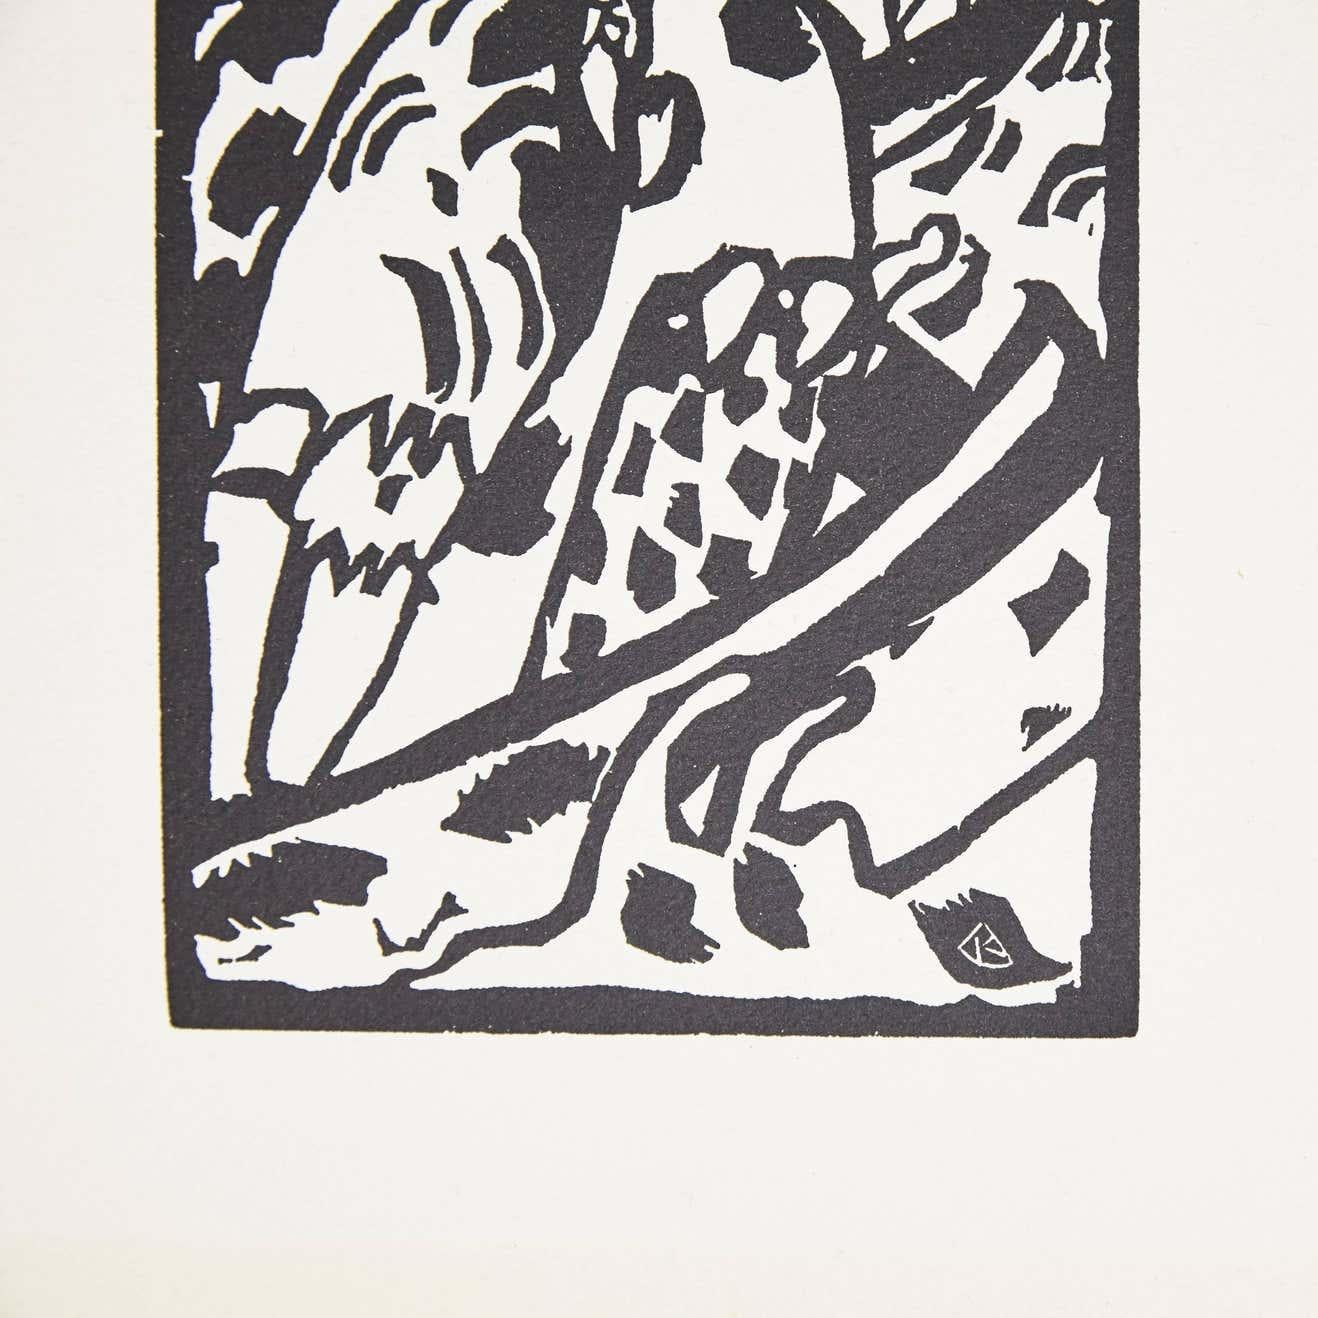 Woodcut by Wassily Kandinsky.
Wood engraving for the portfolio 